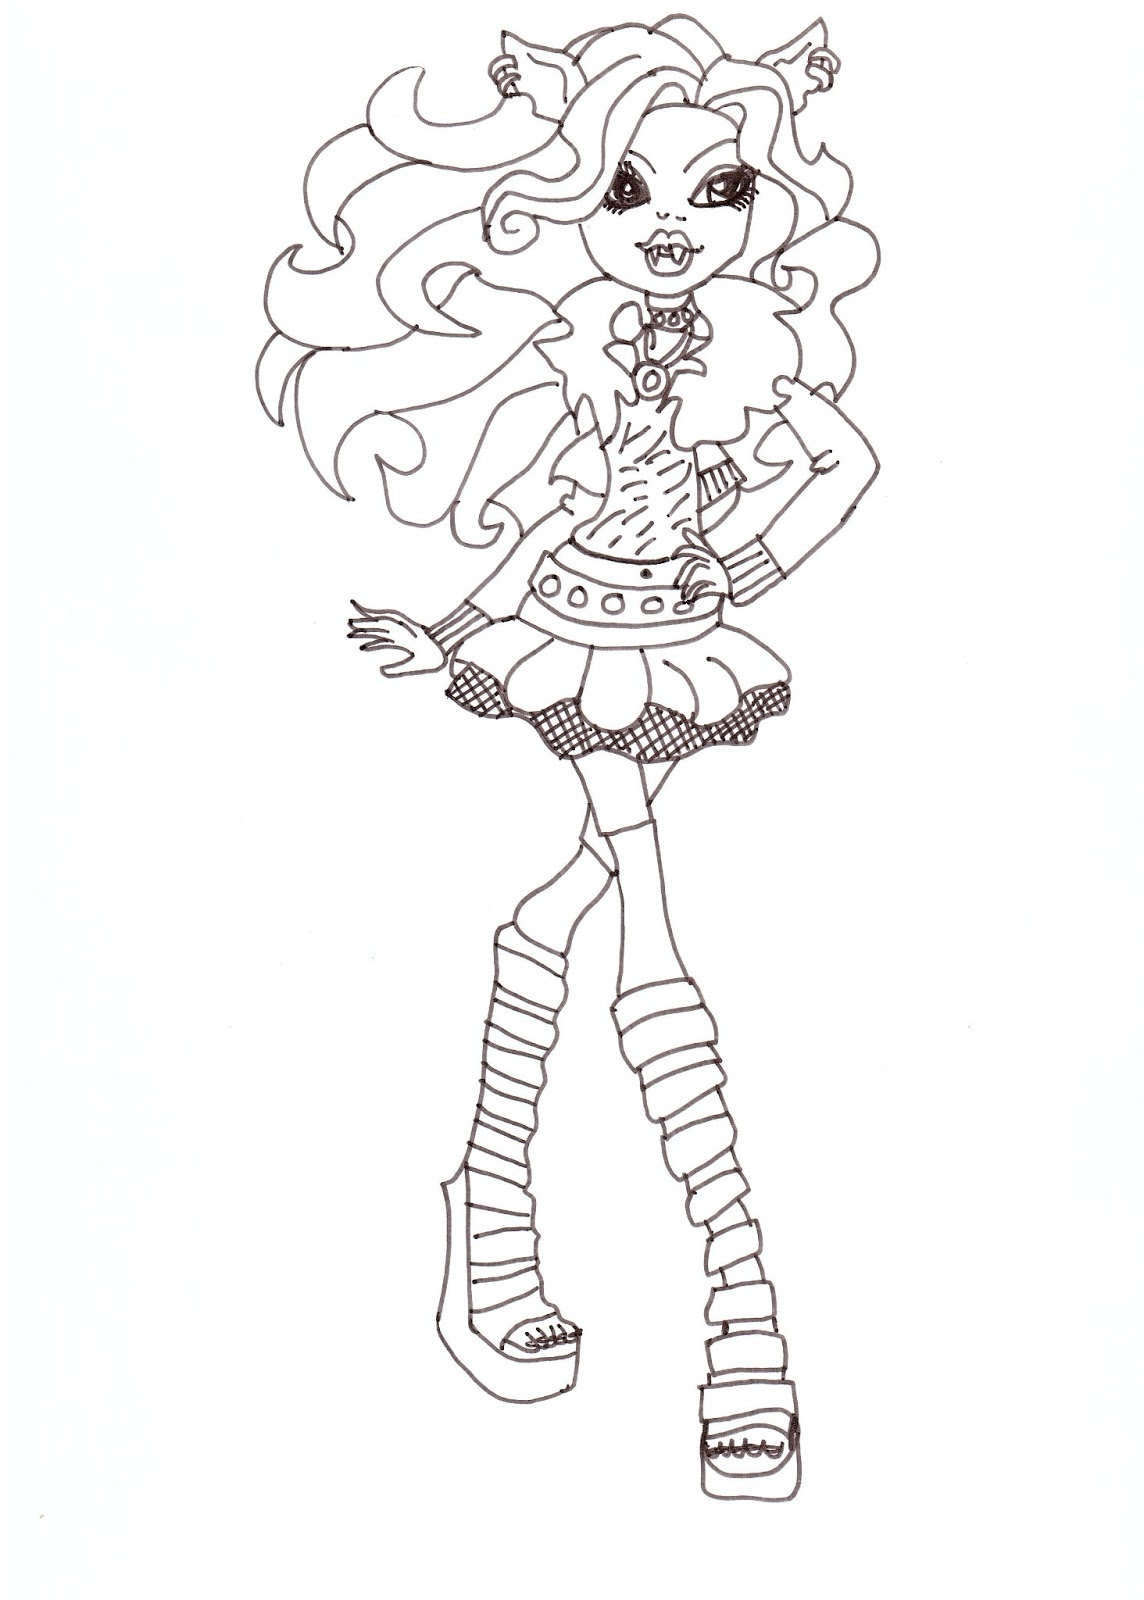 Free Printable Monster High Coloring Pages: Clawdeen Wolf Free Coloring